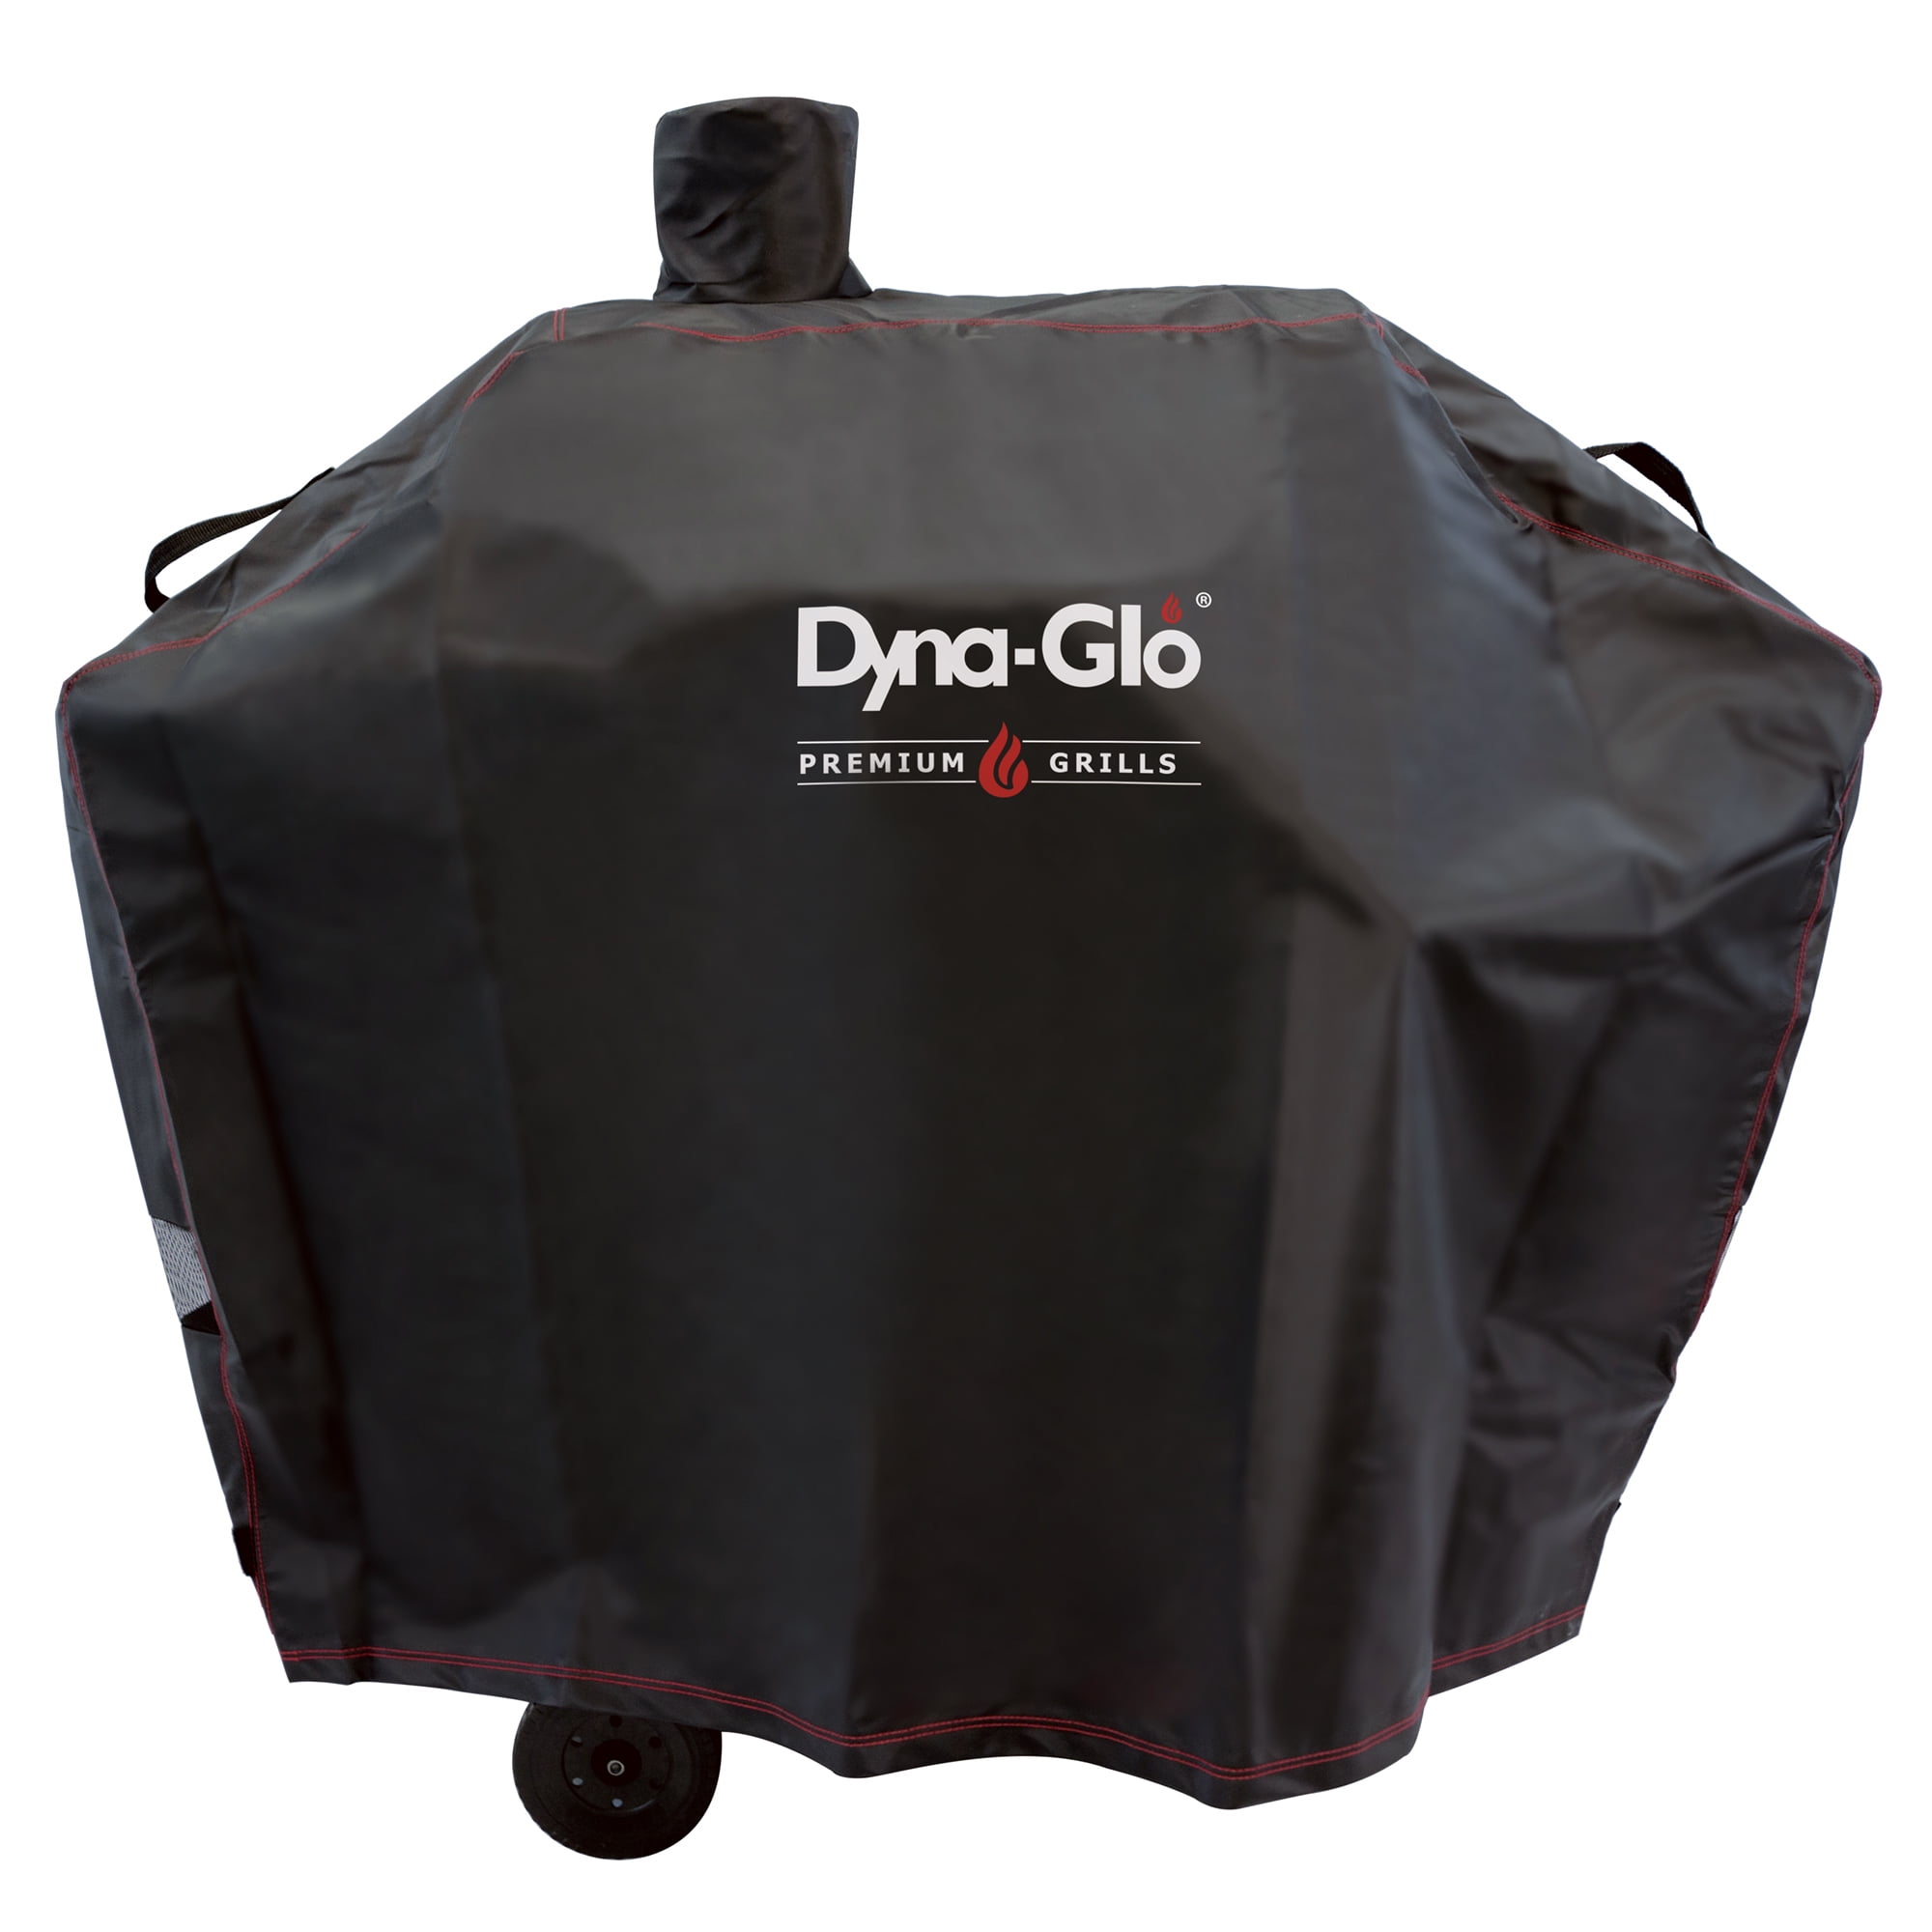 Dyna Glo Premium Vertical Smoker Cover Wide Body Outdoor Protection Heavy Duty 